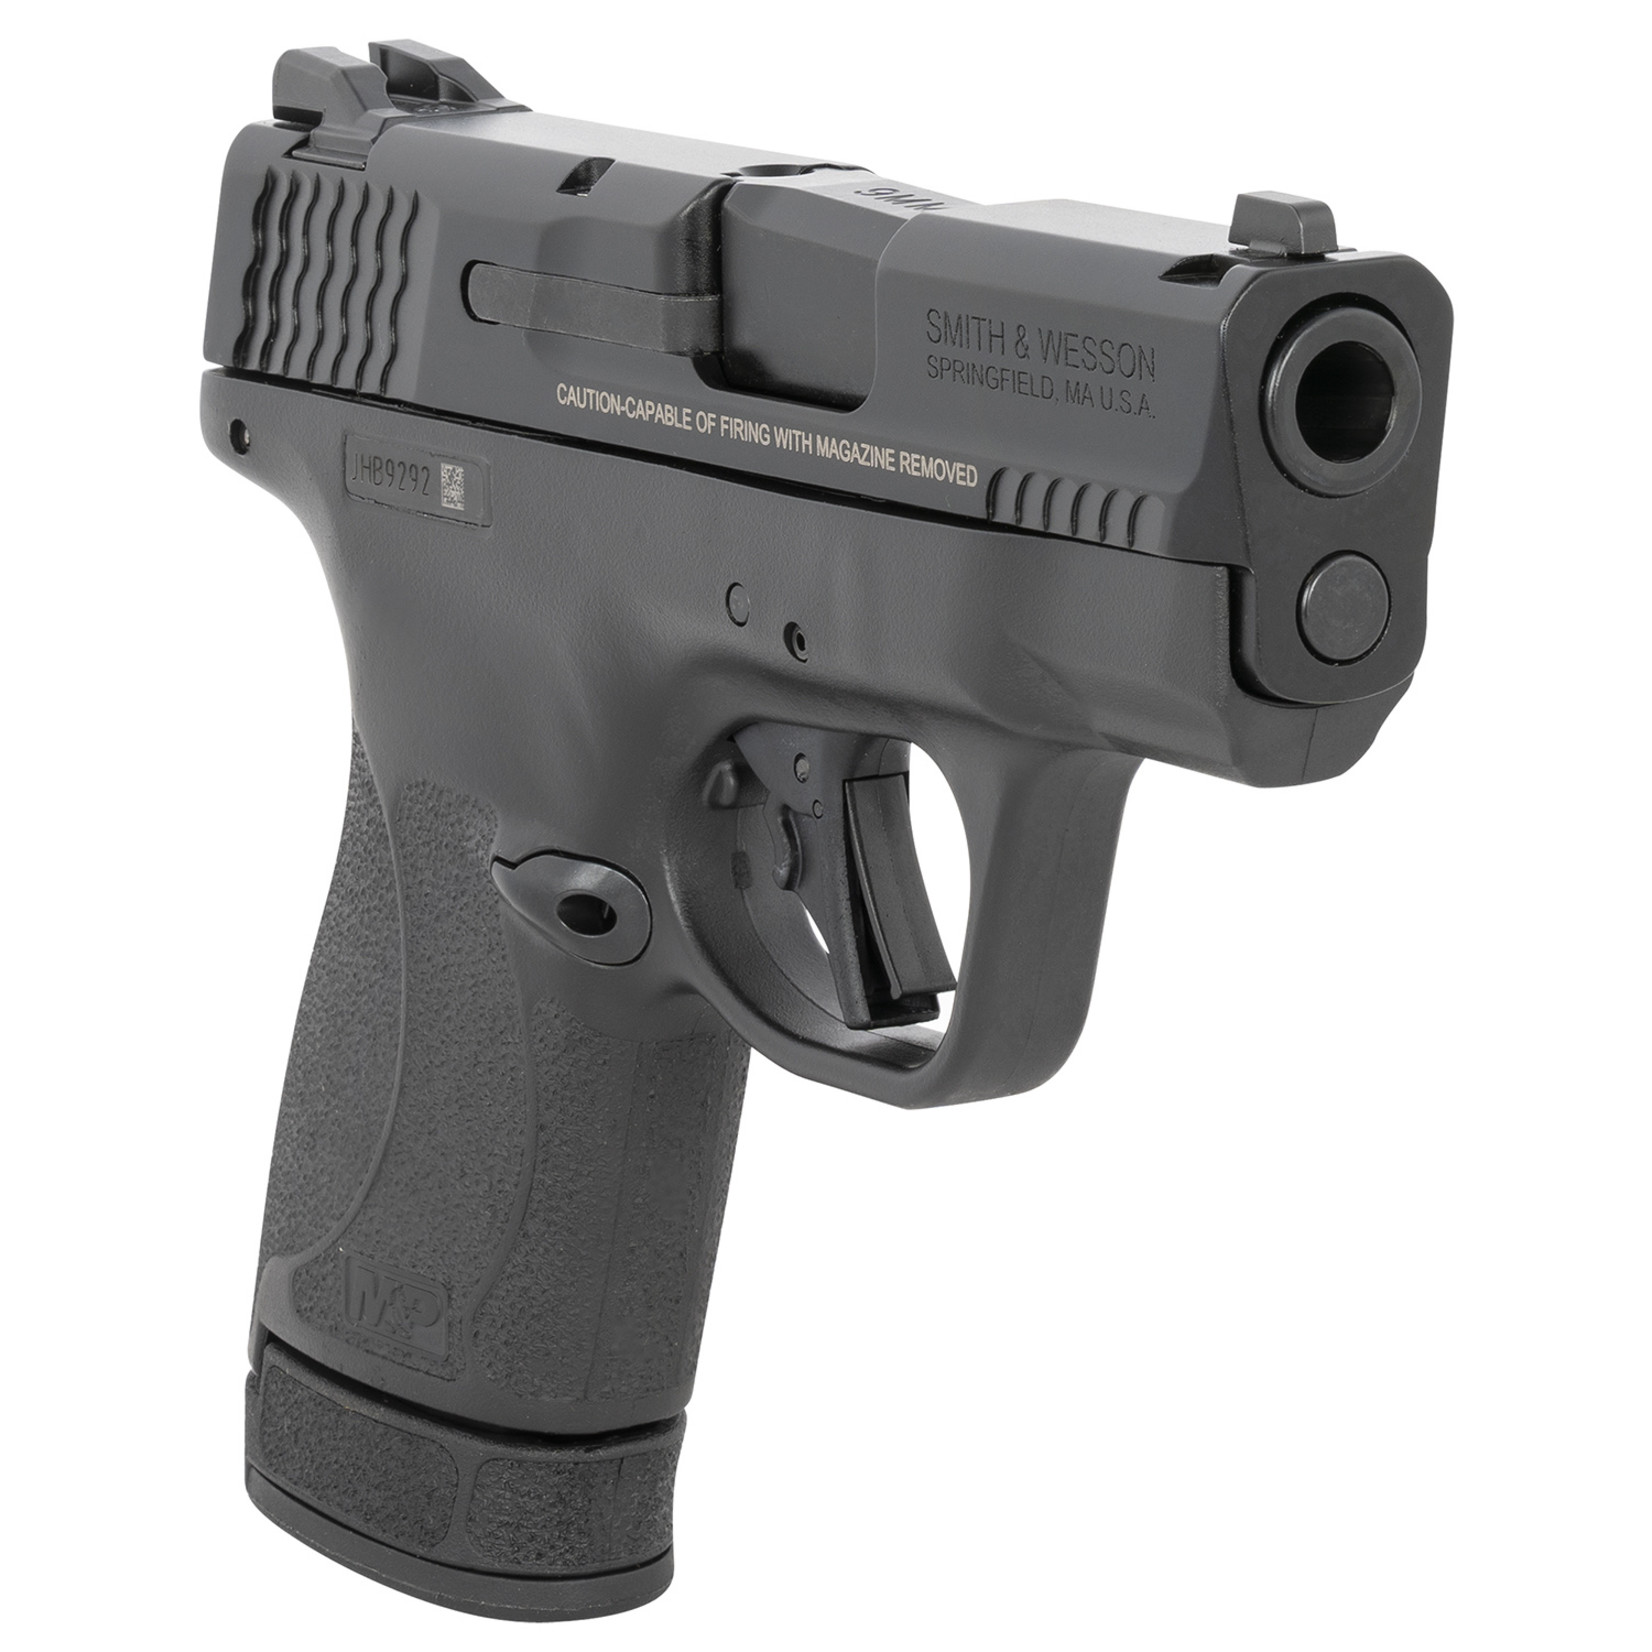 Smith & Wesson Smith & Wesson  M&P Shield 9mm